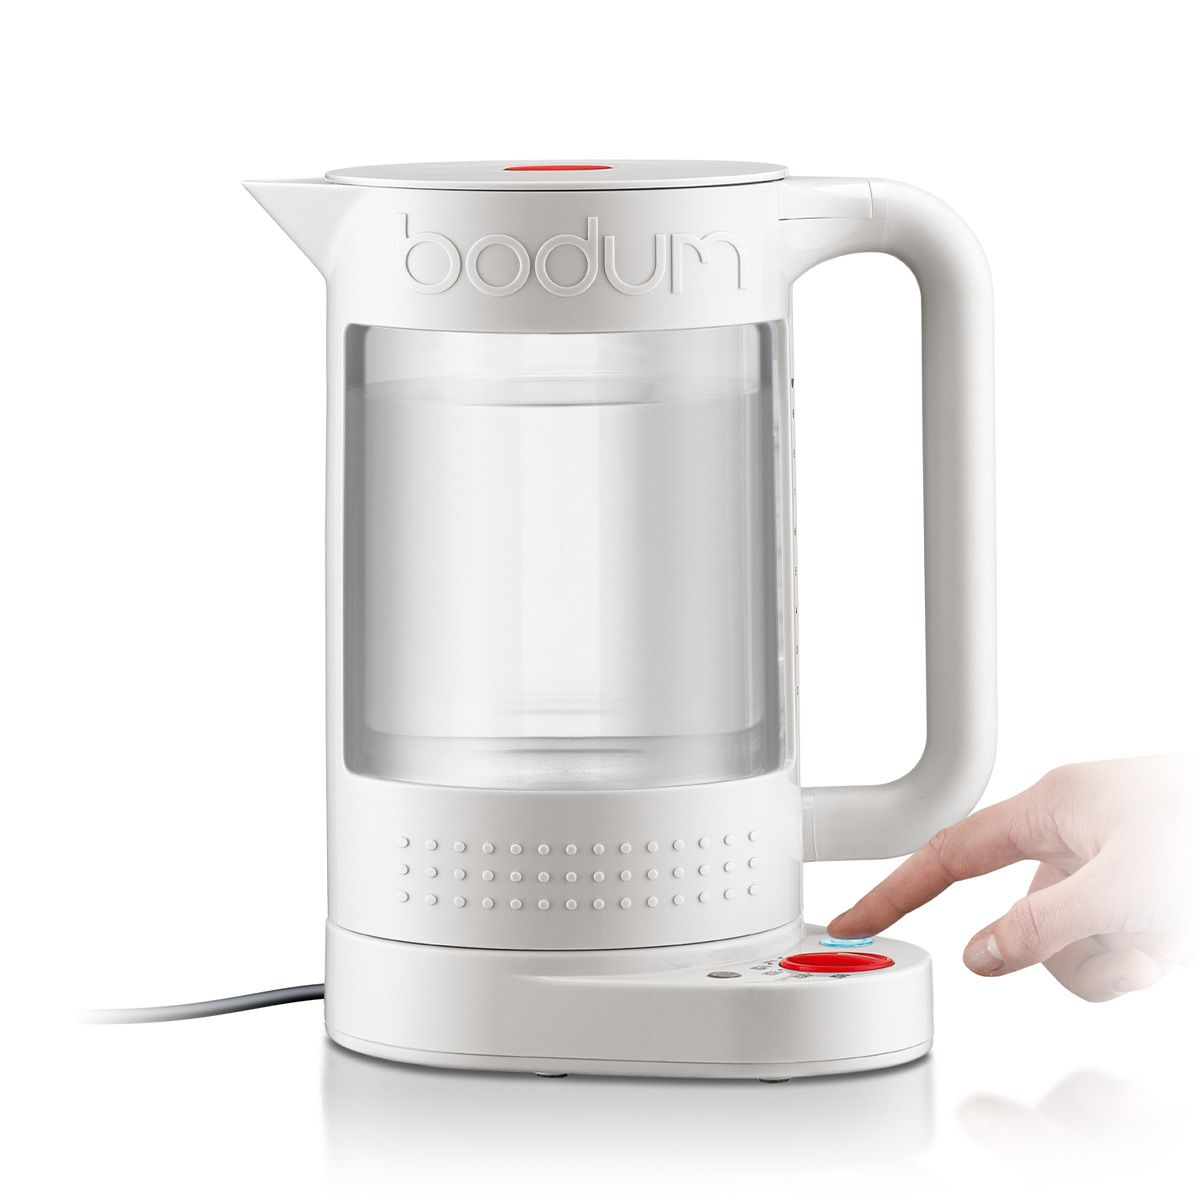 Bodum Bistro Electric Kettle Double Walled With Temperature Control Cream Colored, 1.1 L